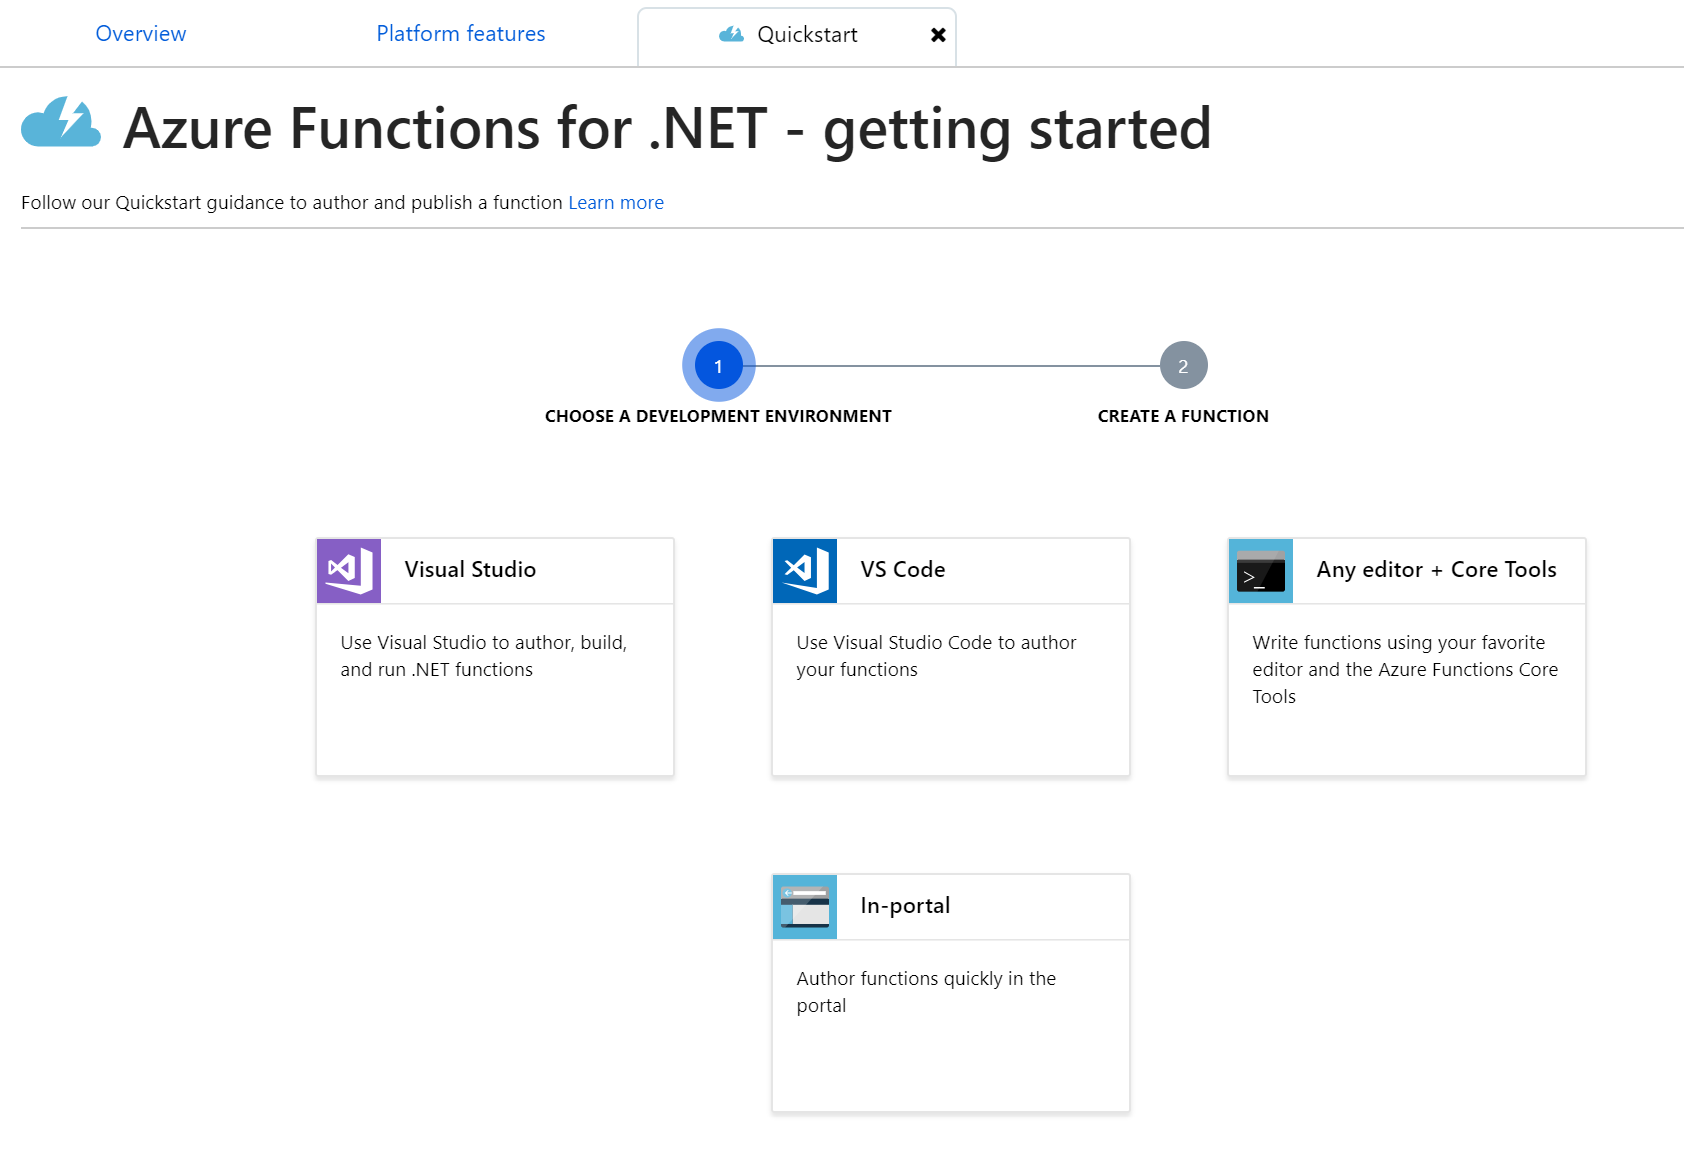 Developing Azure Functions